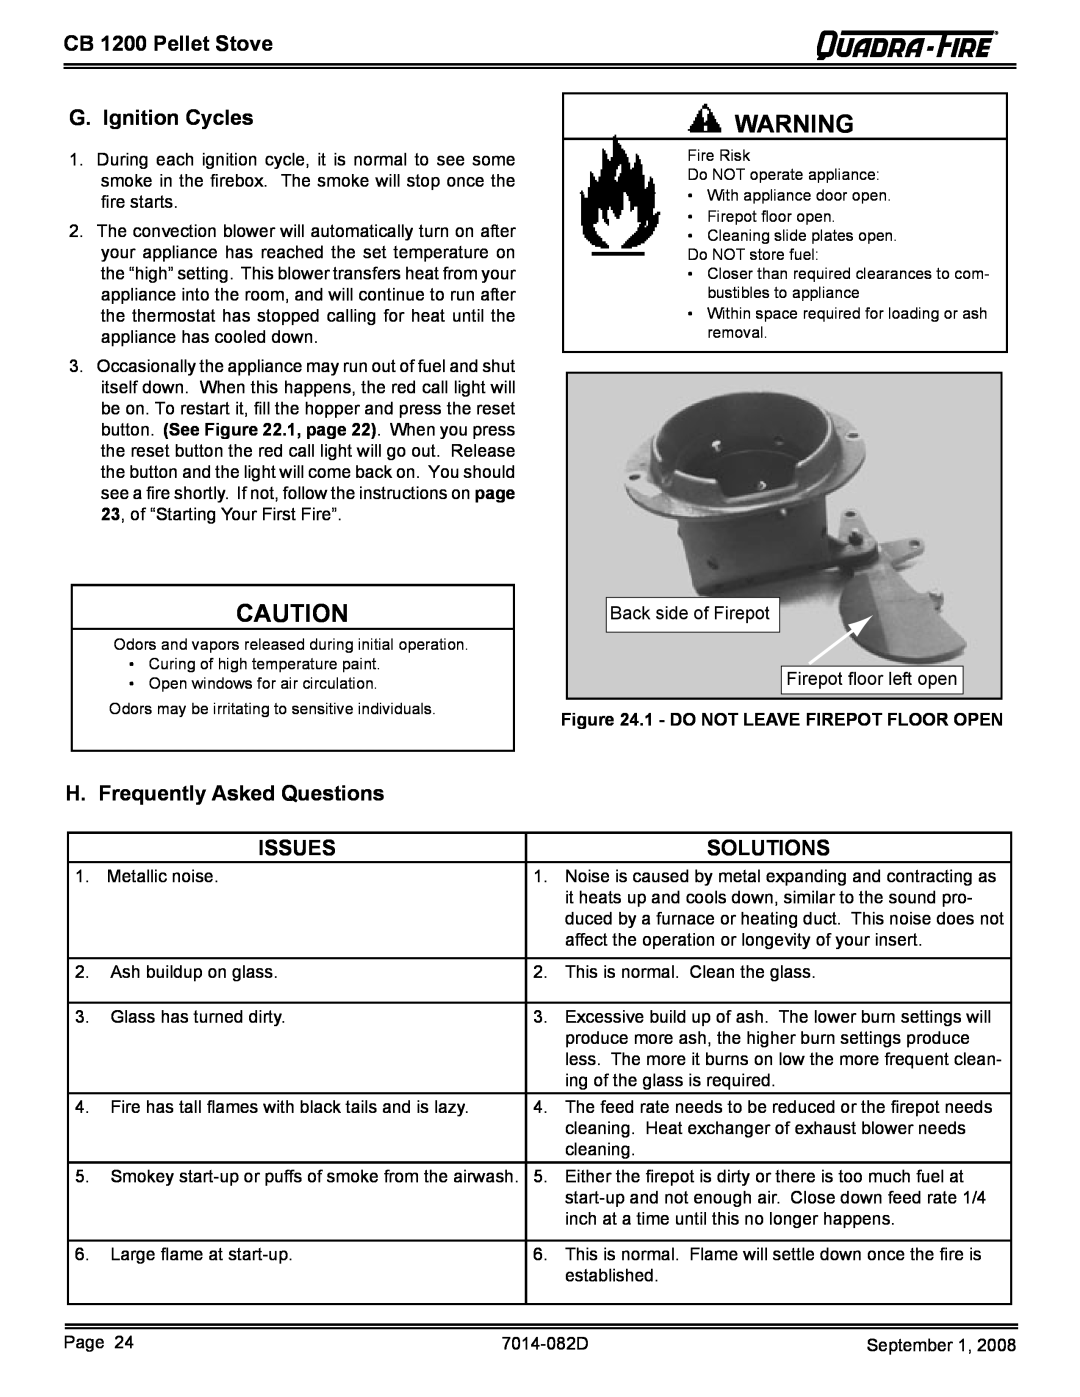 Quadra-Fire CB1200-B G. Ignition Cycles, H. Frequently Asked Questions, Issues, Solutions, CB 1200 Pellet Stove 